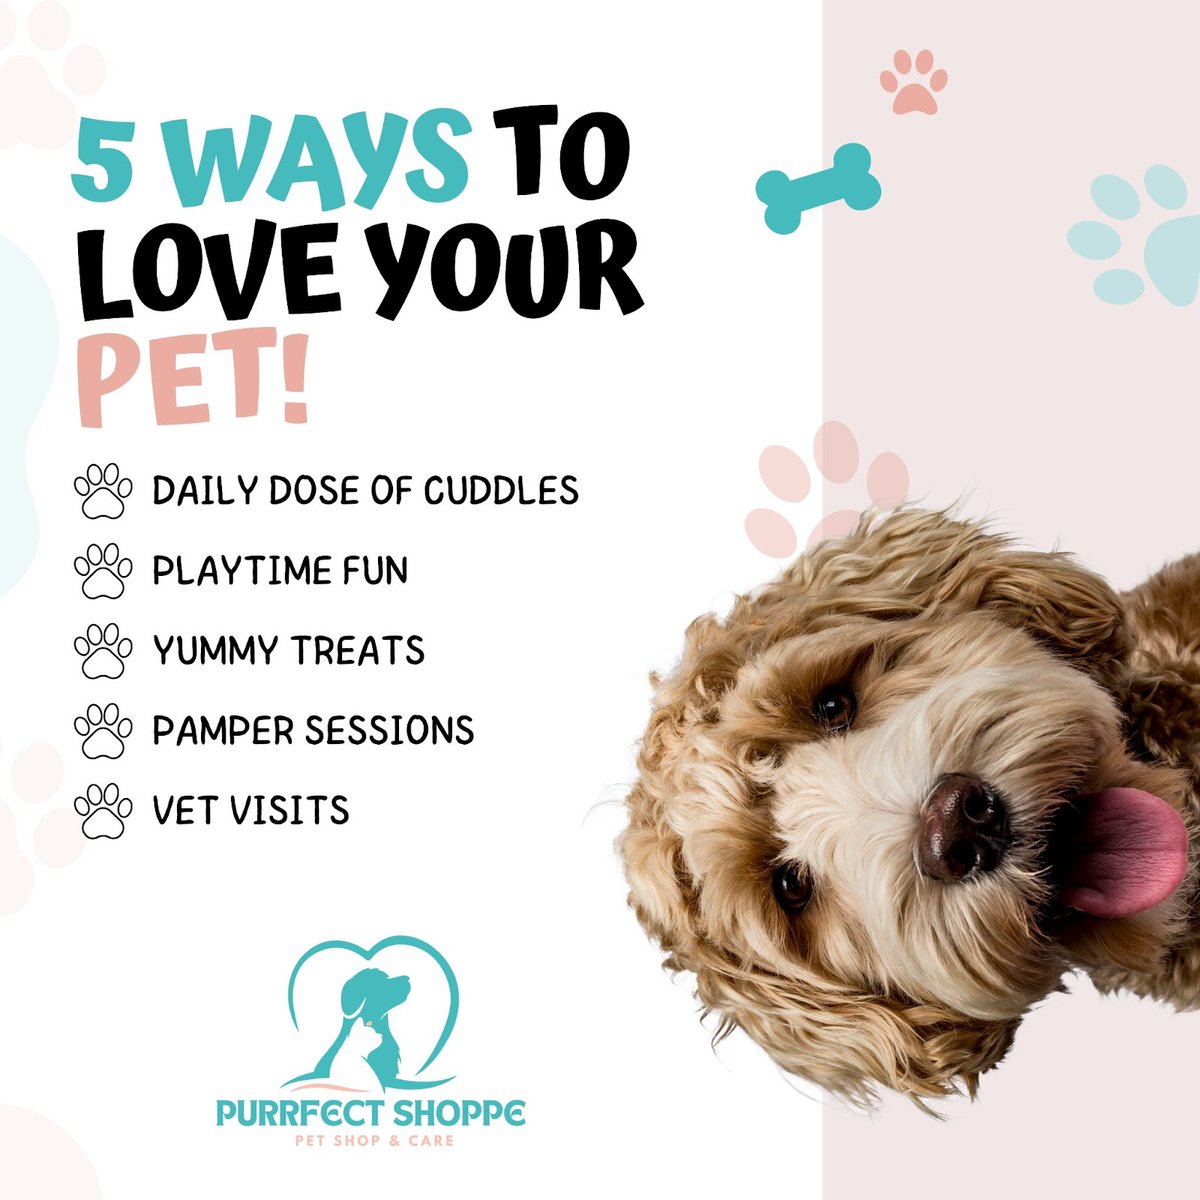 What’s your pet’s fave love language? 💚🐾
-----
Shop the best pet products ➡️ purrfectshoppe.com
.
#petlovers #petcare #petsupplies #furbabies #pawsomeproducts #petaccessories #petessentials #animallovers #healthypets #happypets #petshop #petparents #doglovers